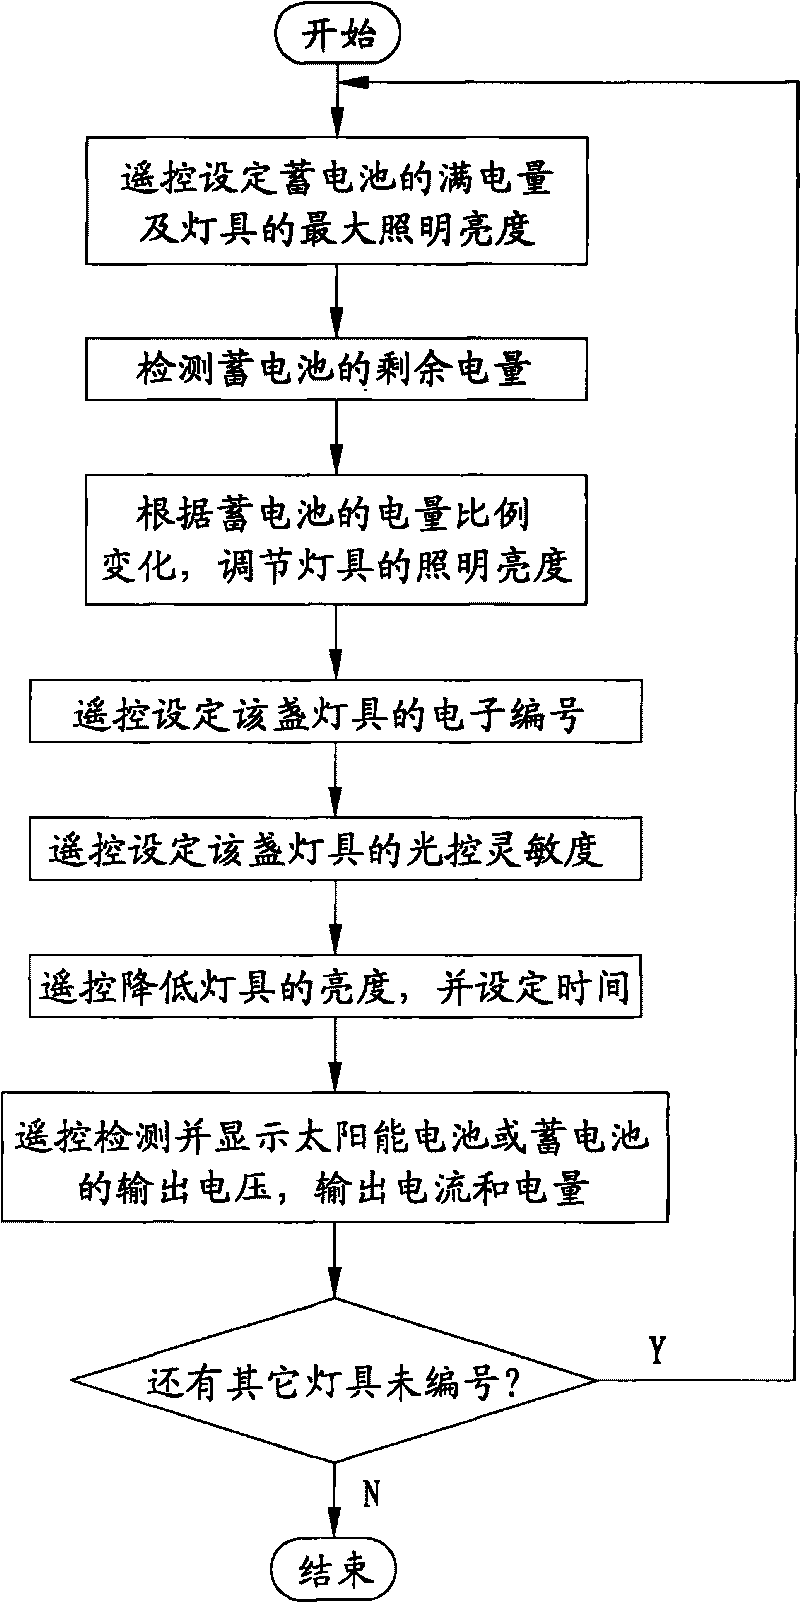 Intelligent remote control system and remote control method of solar LED lamps